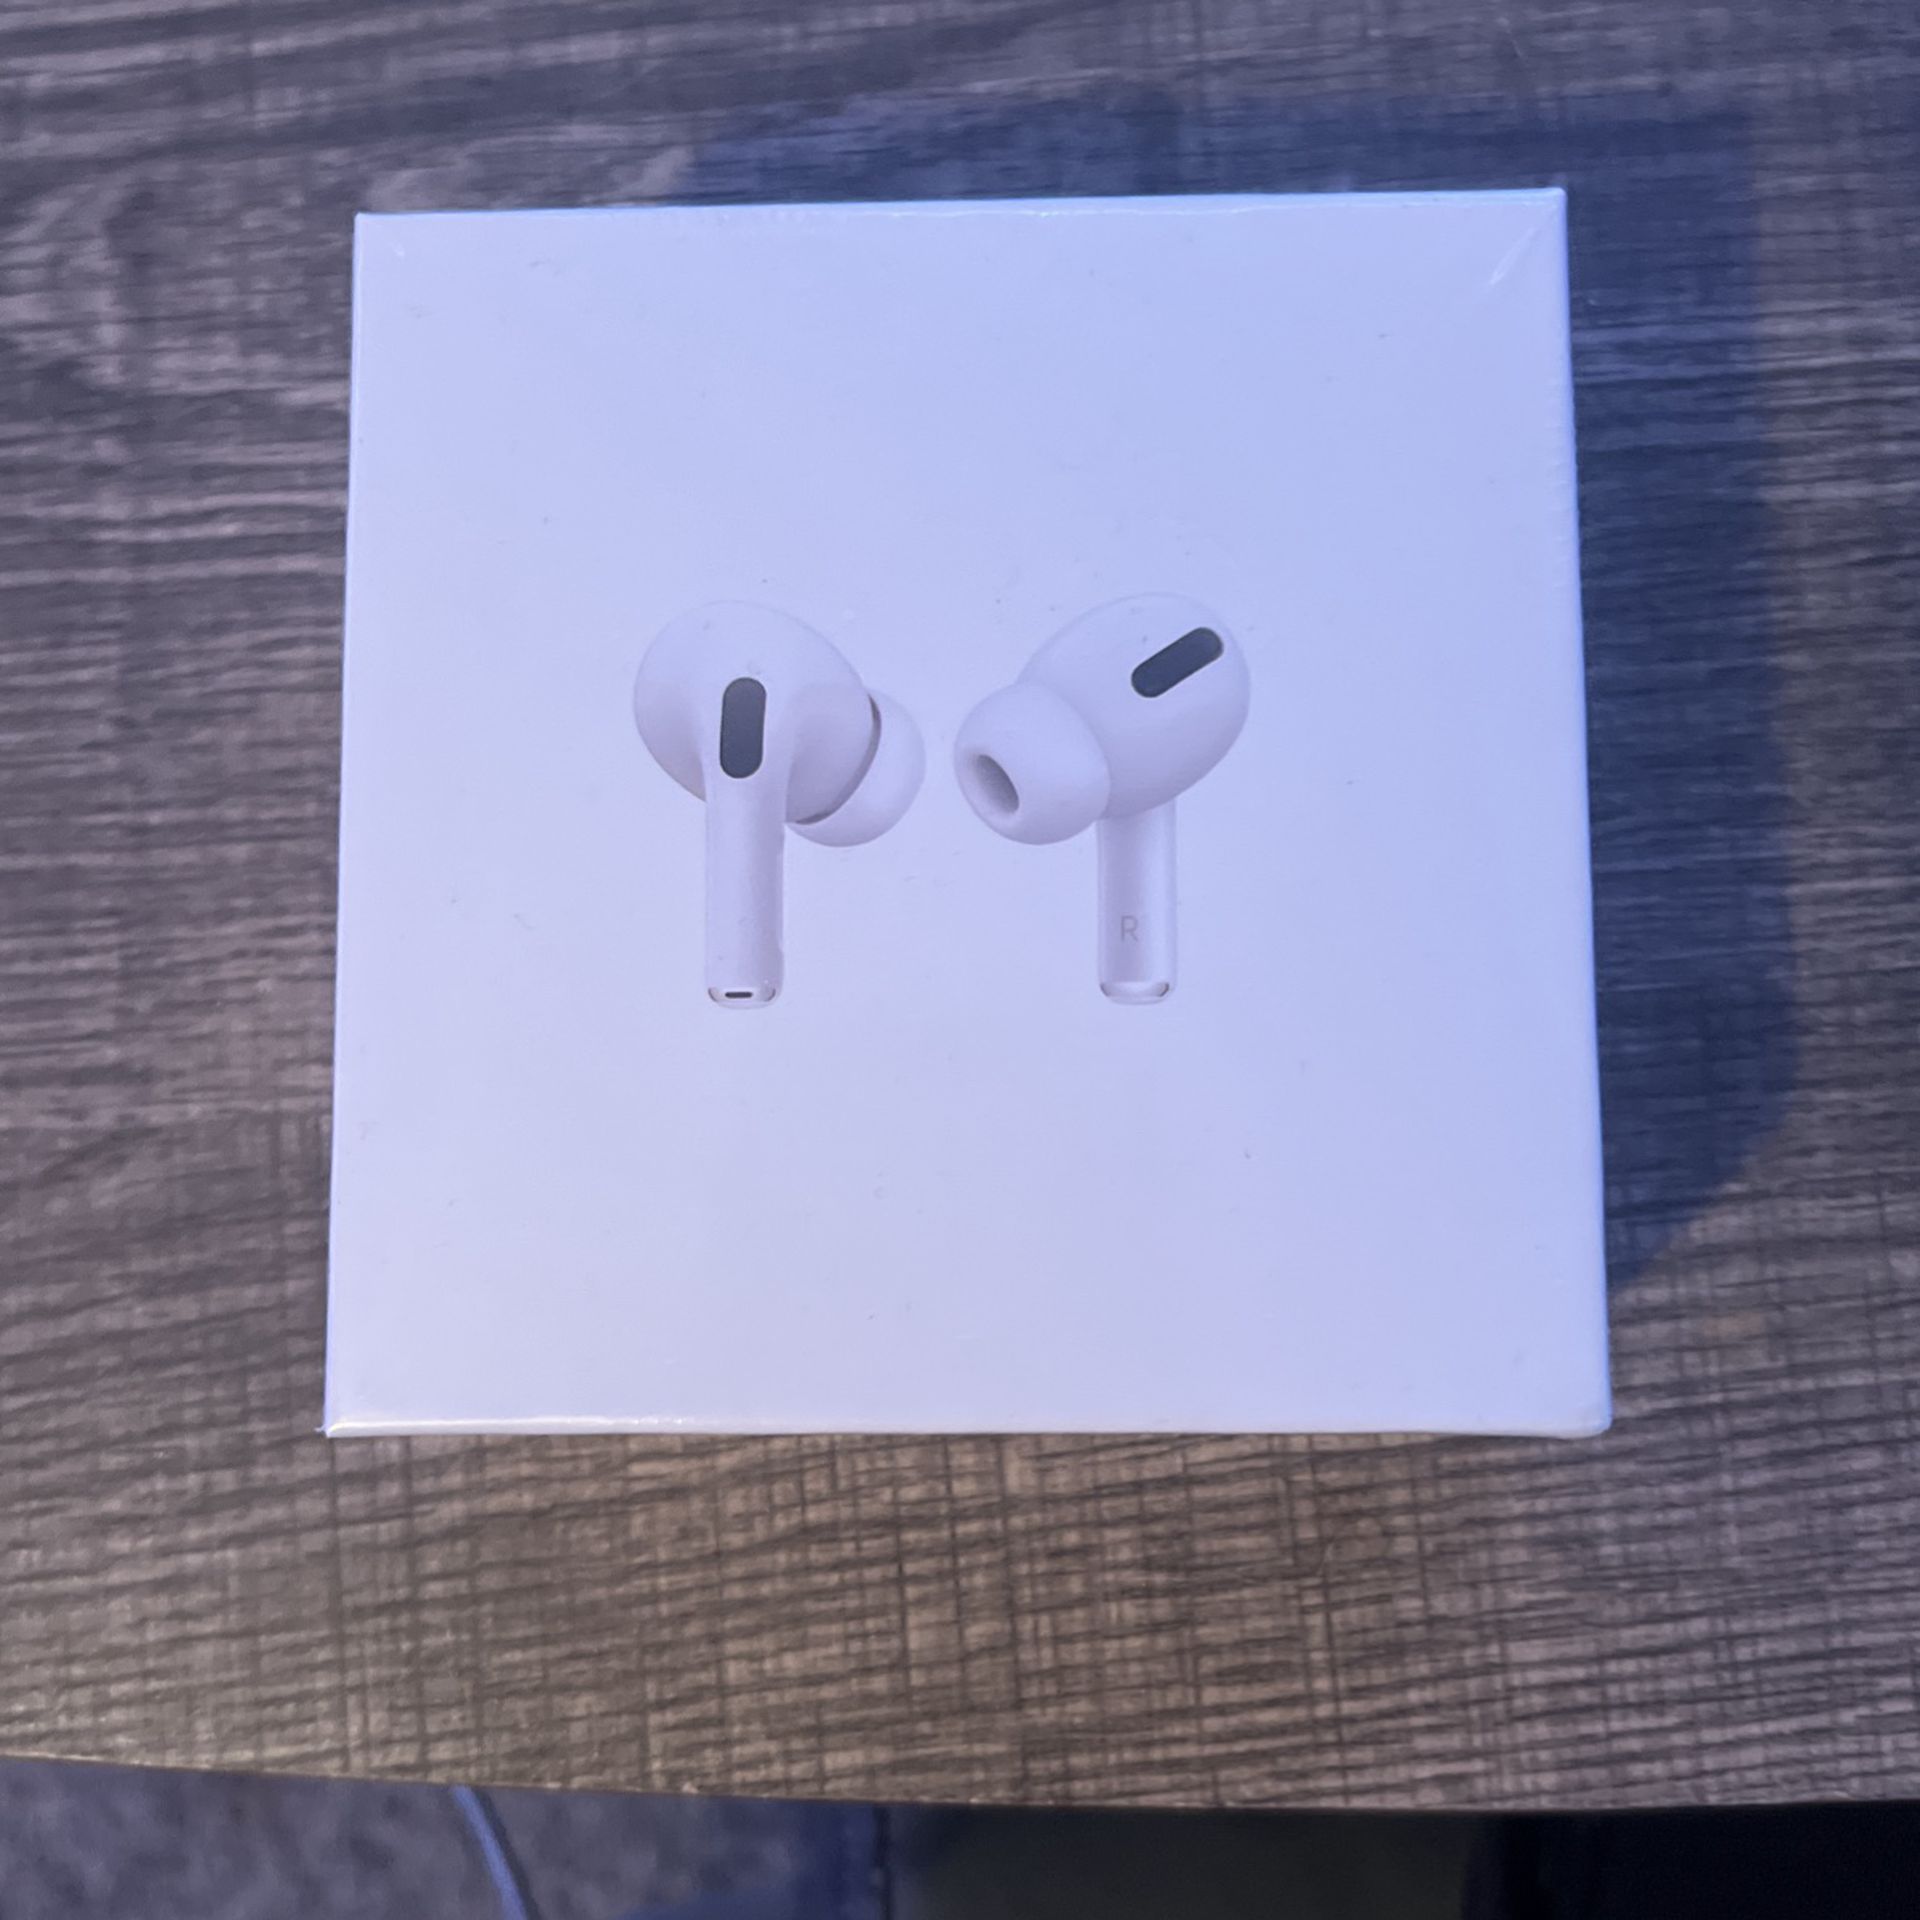 AirPods Pro, 2nd generation with Charging Case